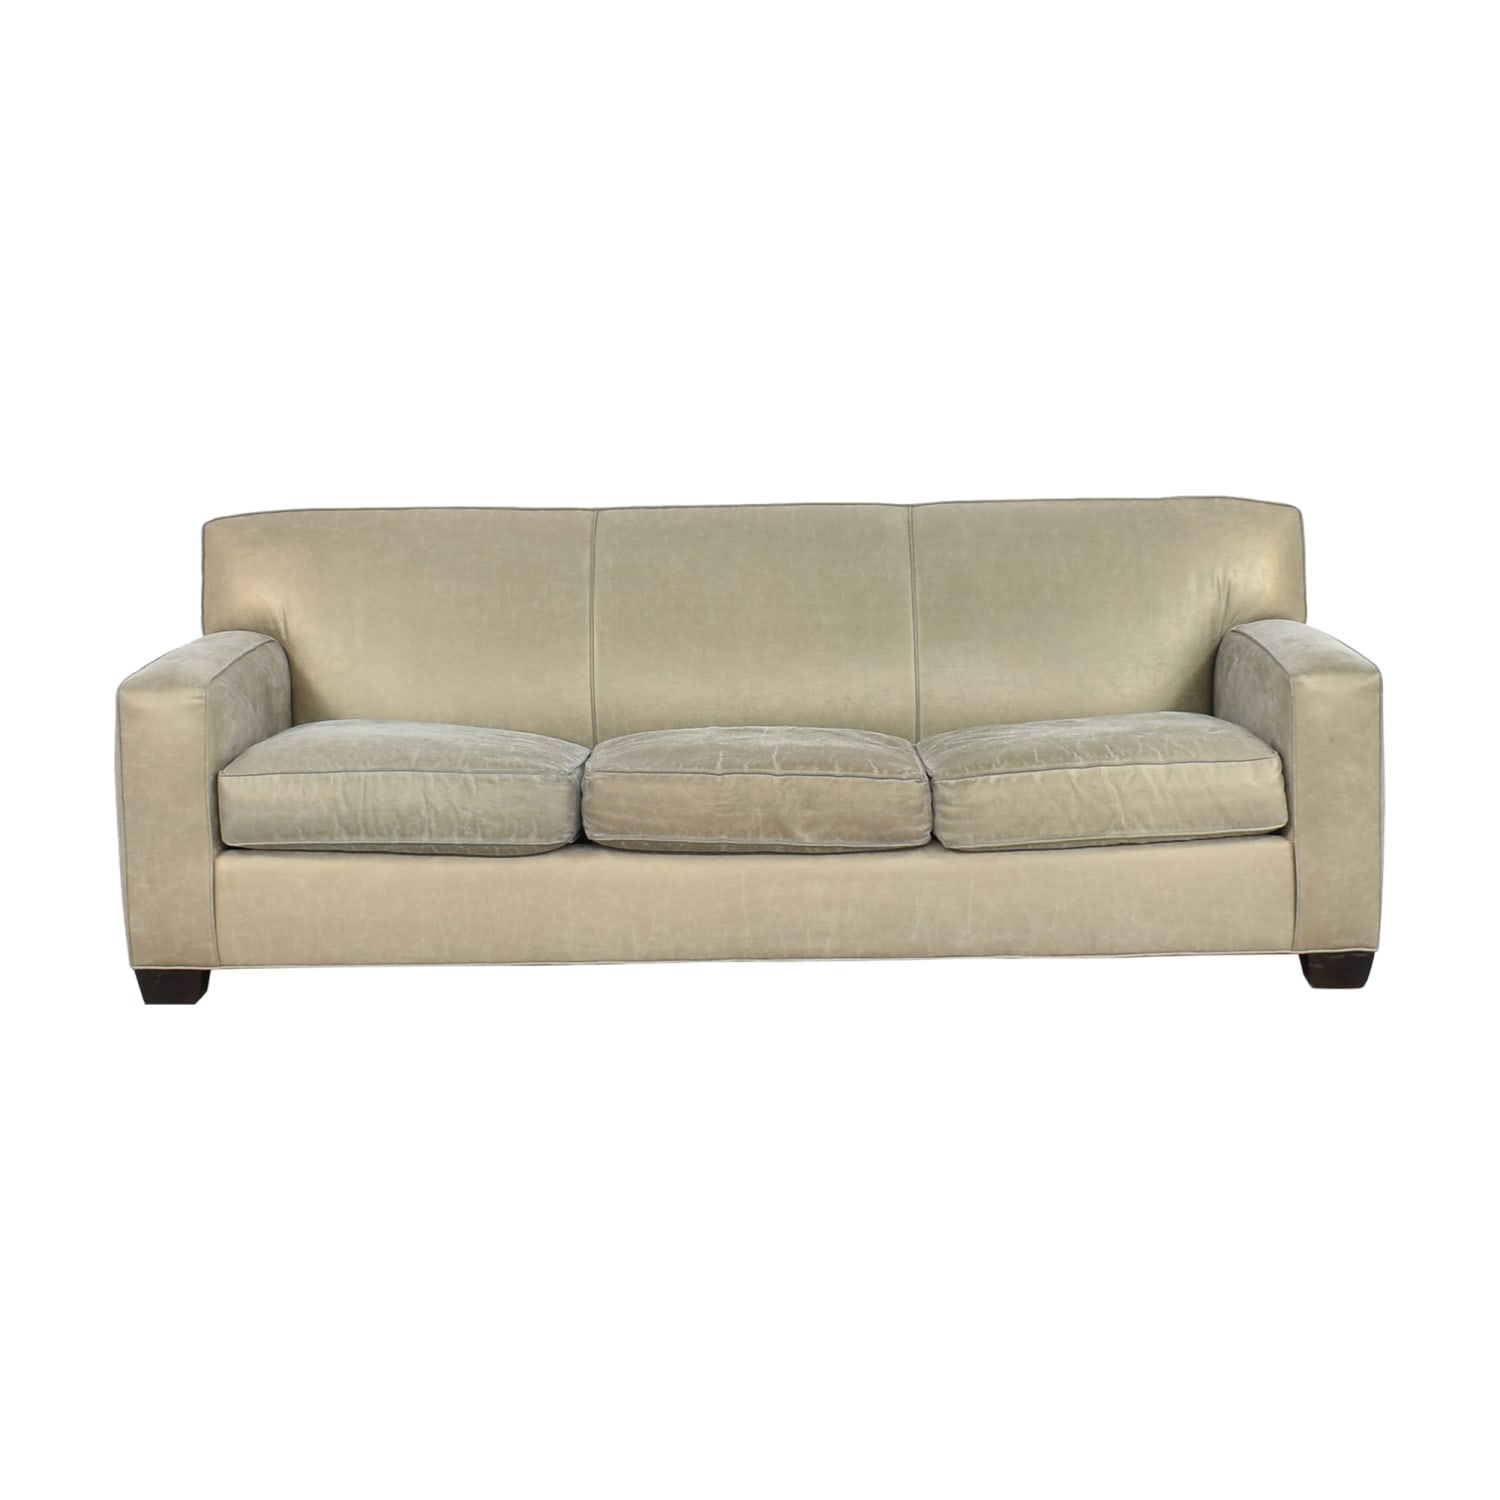 Crate & Barrel Crate and Barrel Axis II Three Seat Sofa for sale